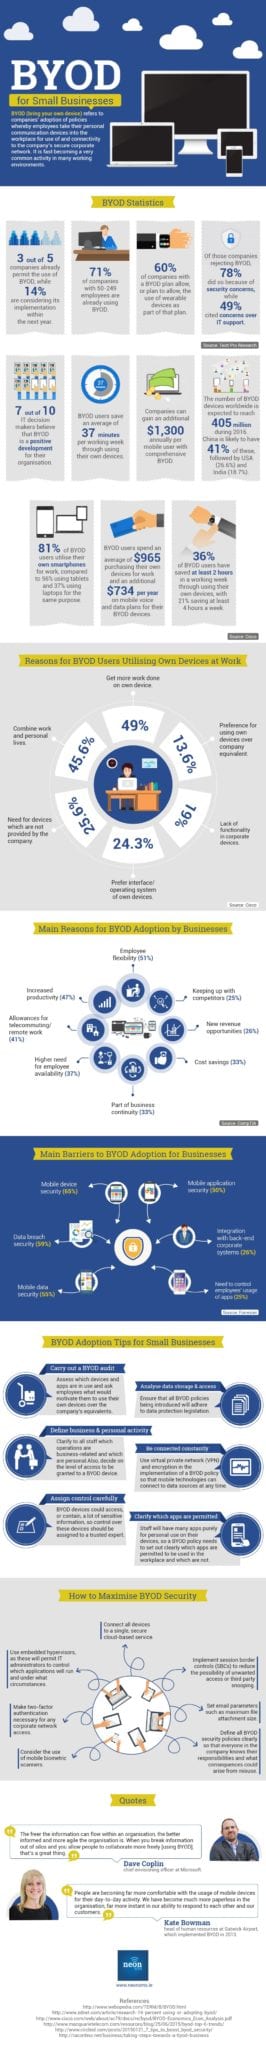 BYOD for Small Business - Infographic